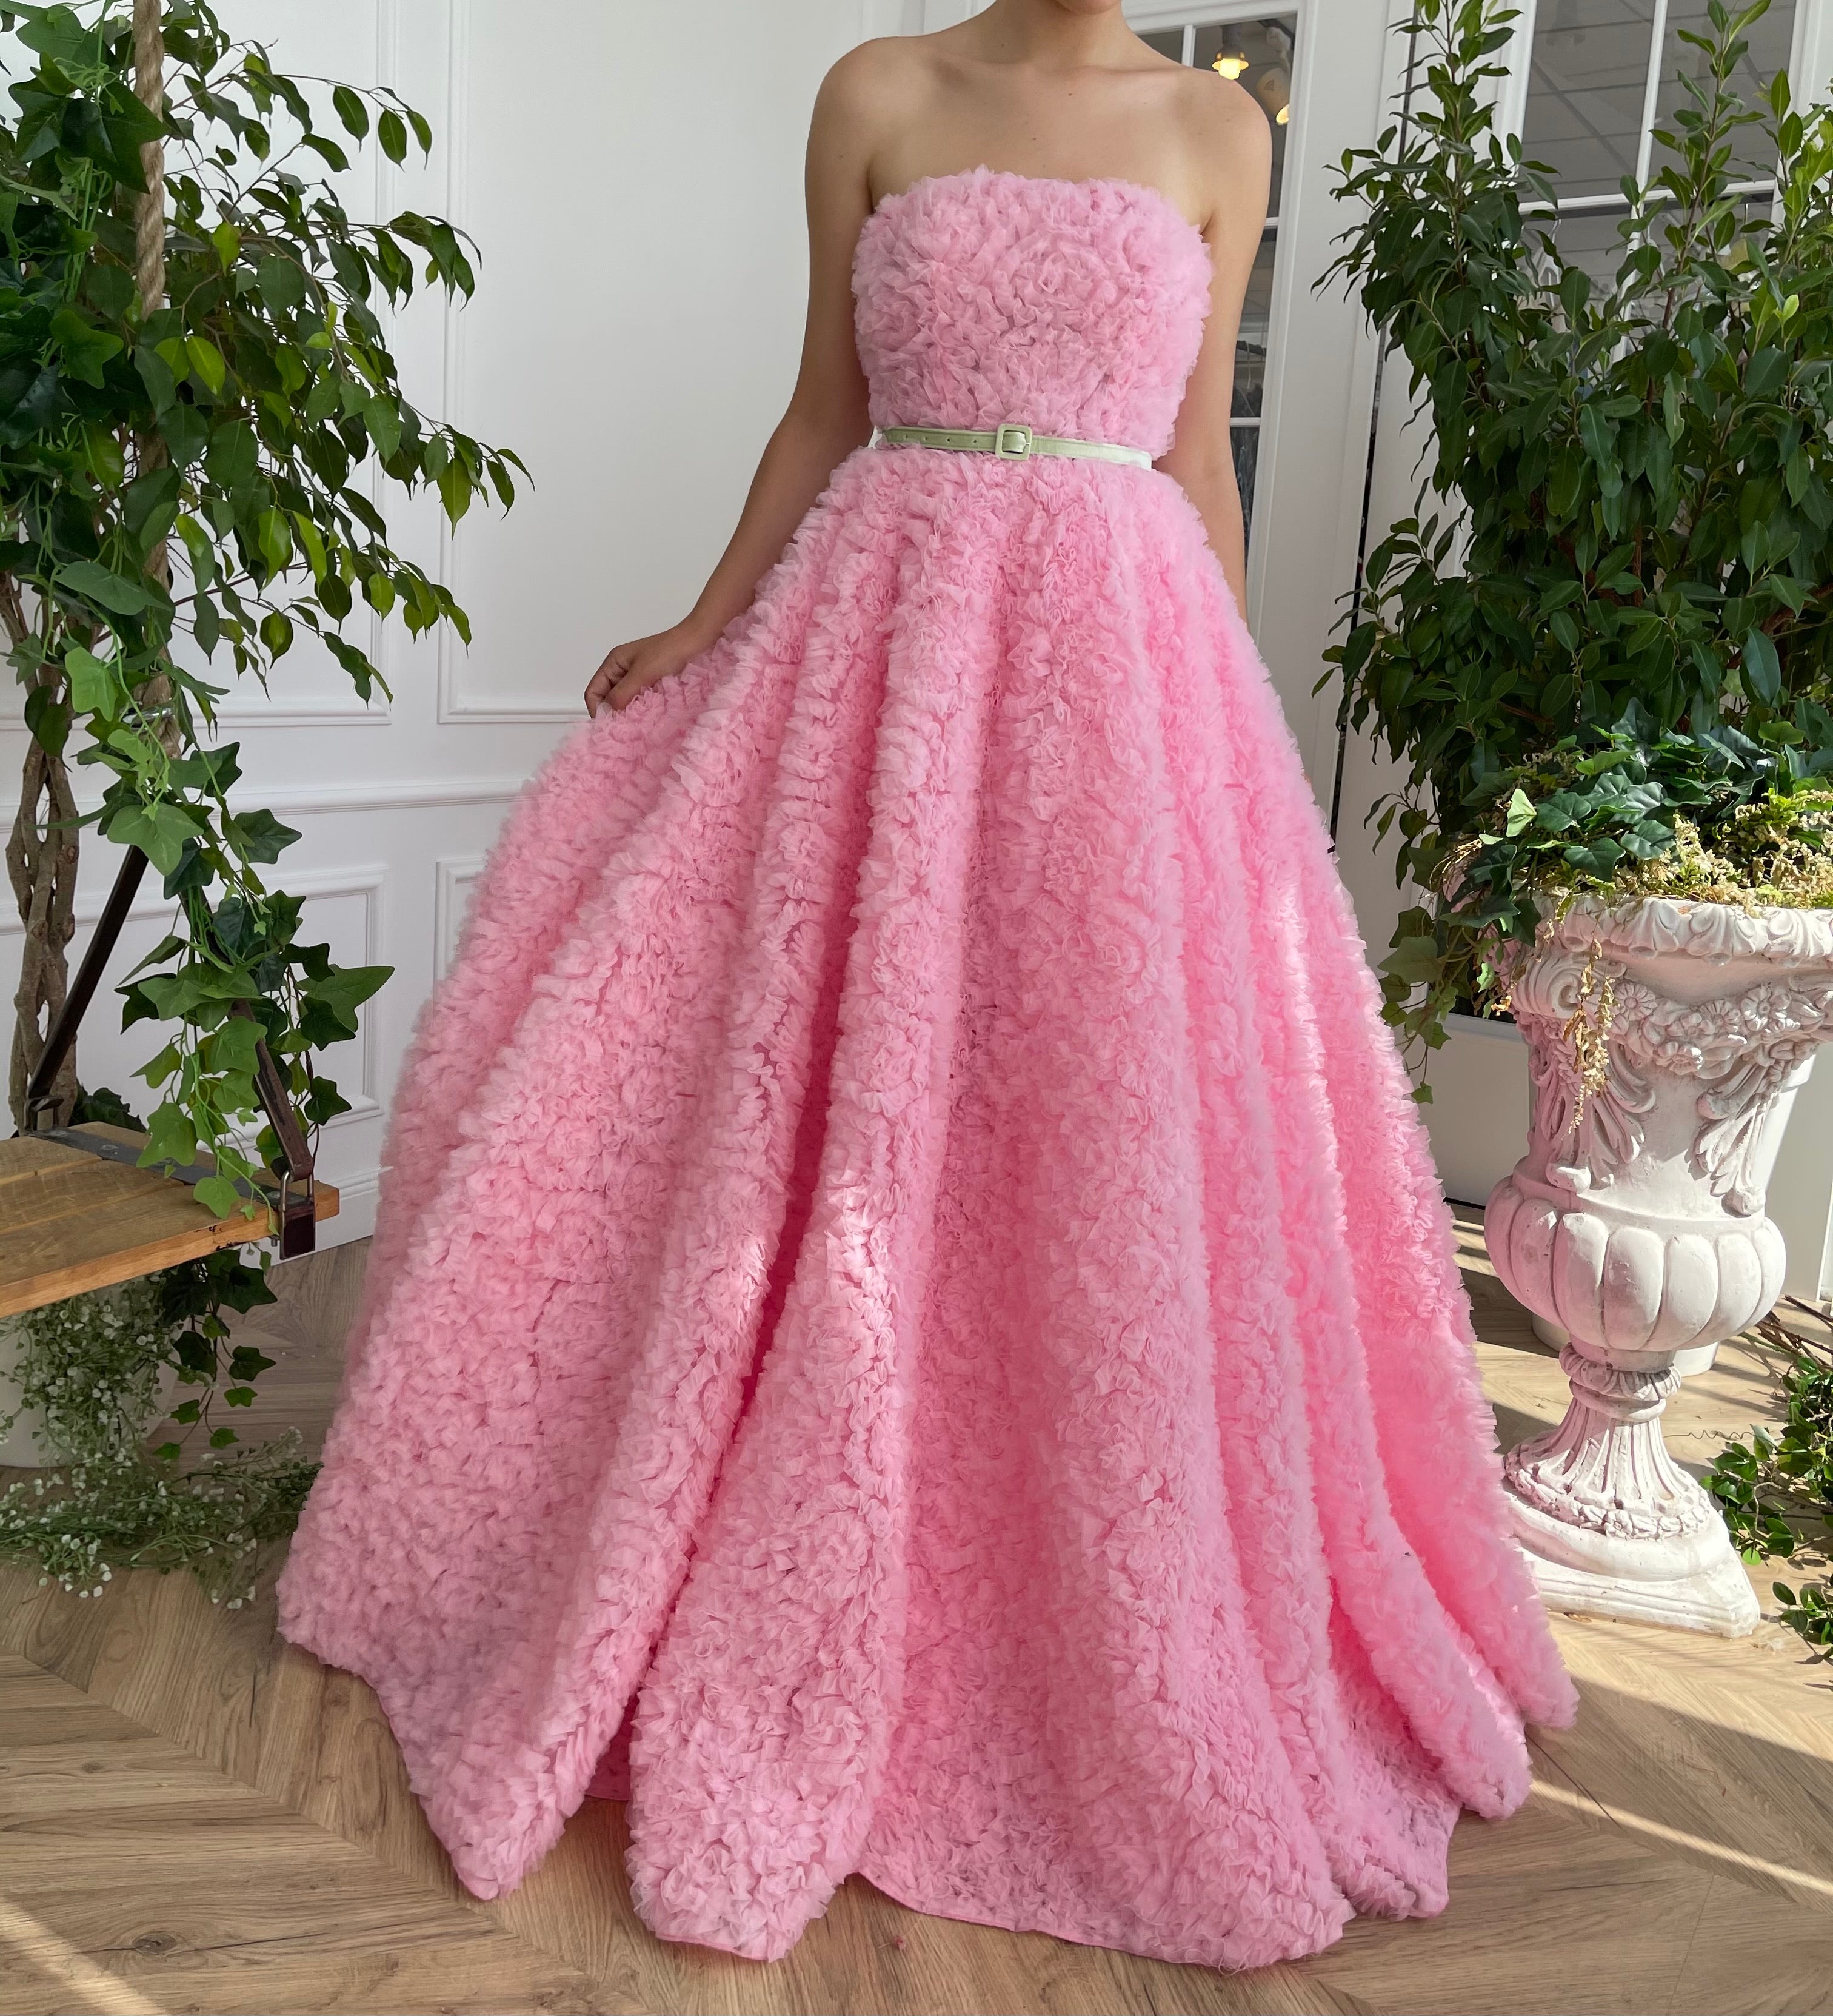 Pink A-Line dress with belt and no sleeves